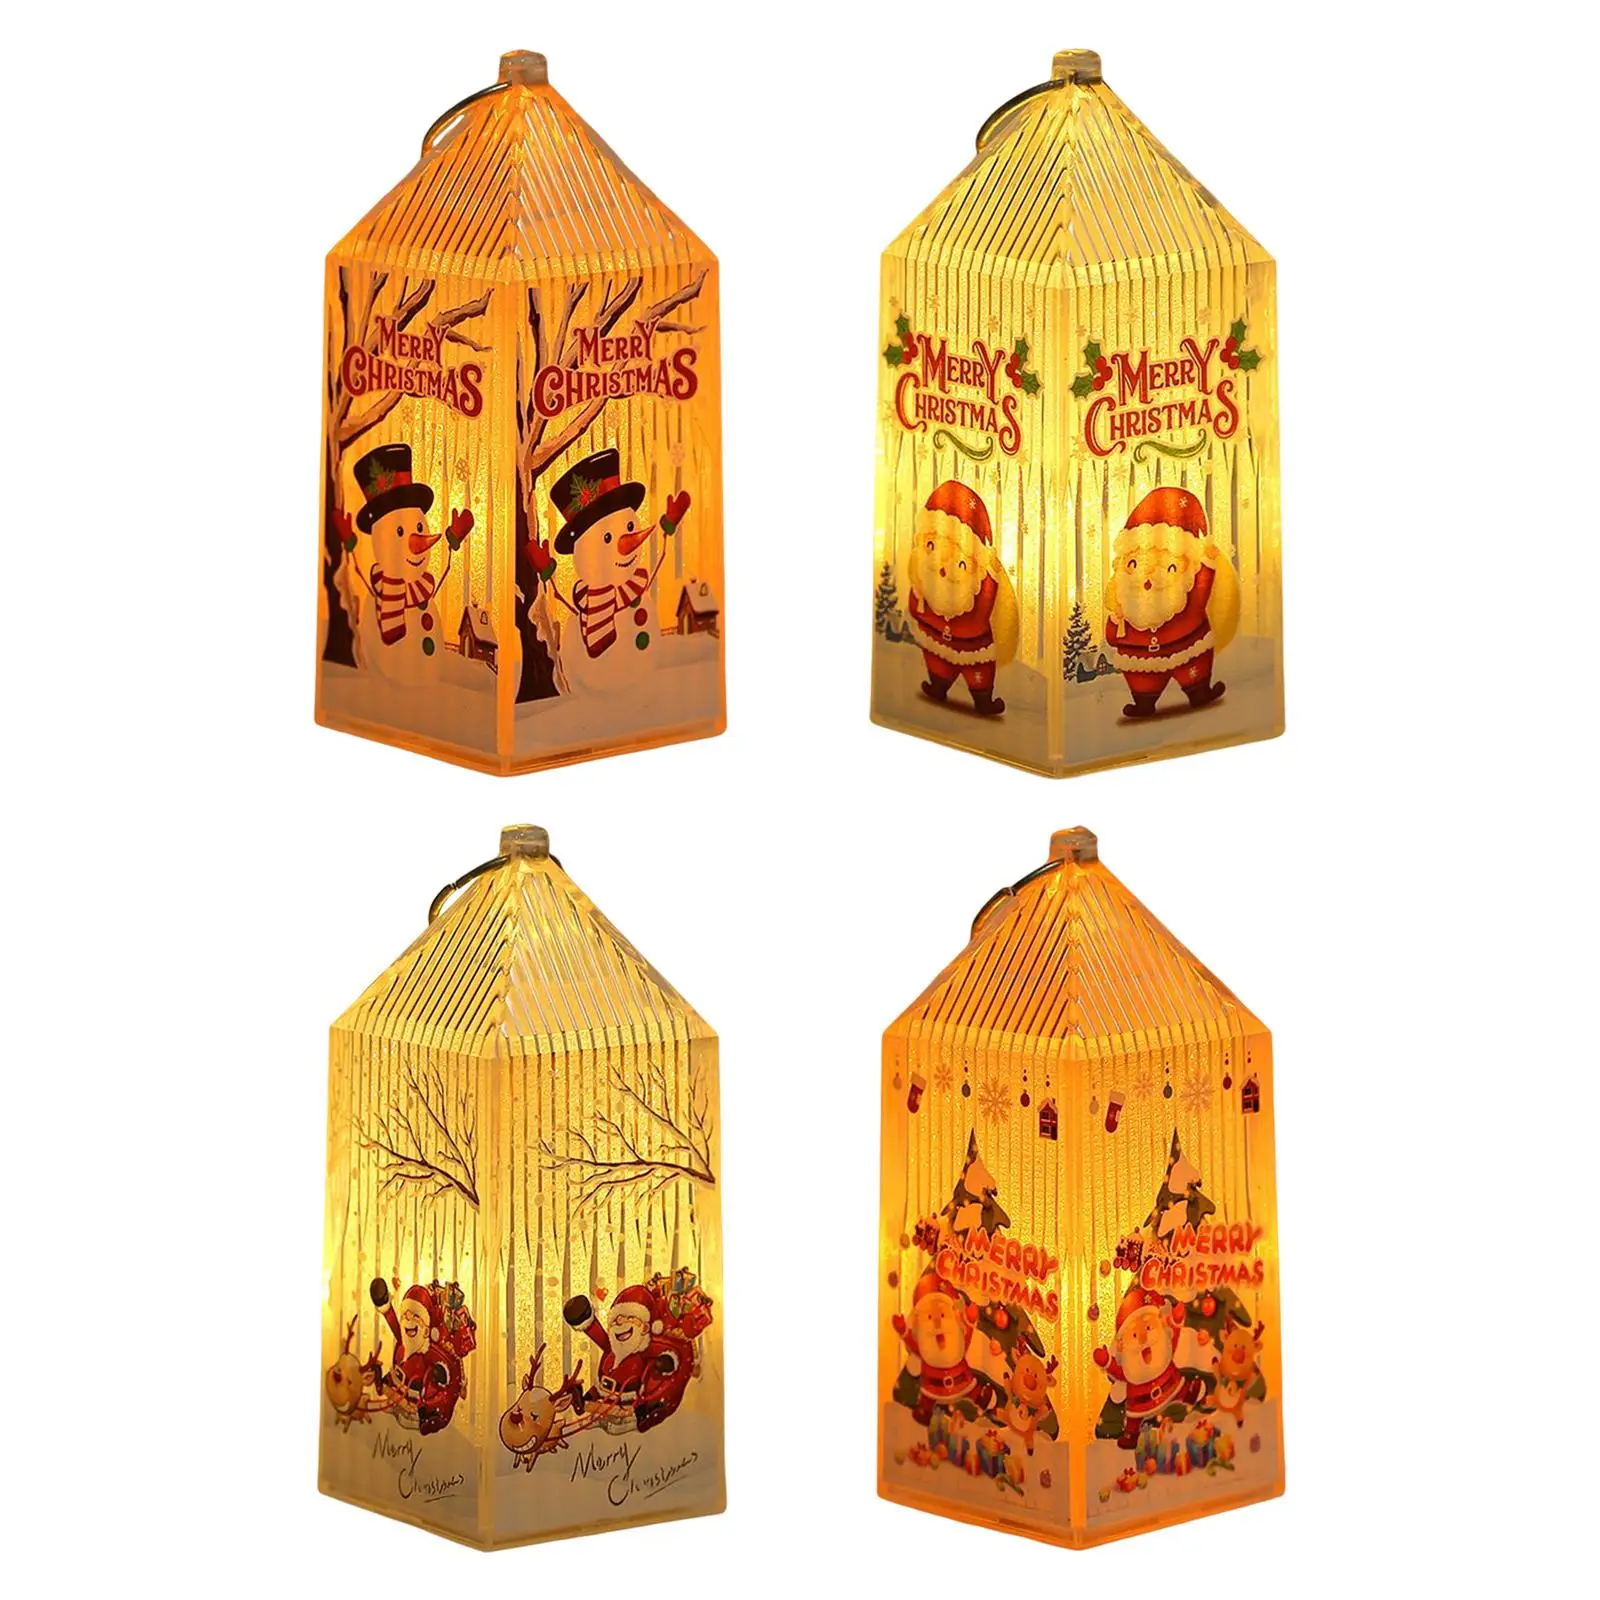 Christmas Lantern Lamp Night Light Battery Operated Hanging Ornament Decorative for Home Table Fireplace Decor